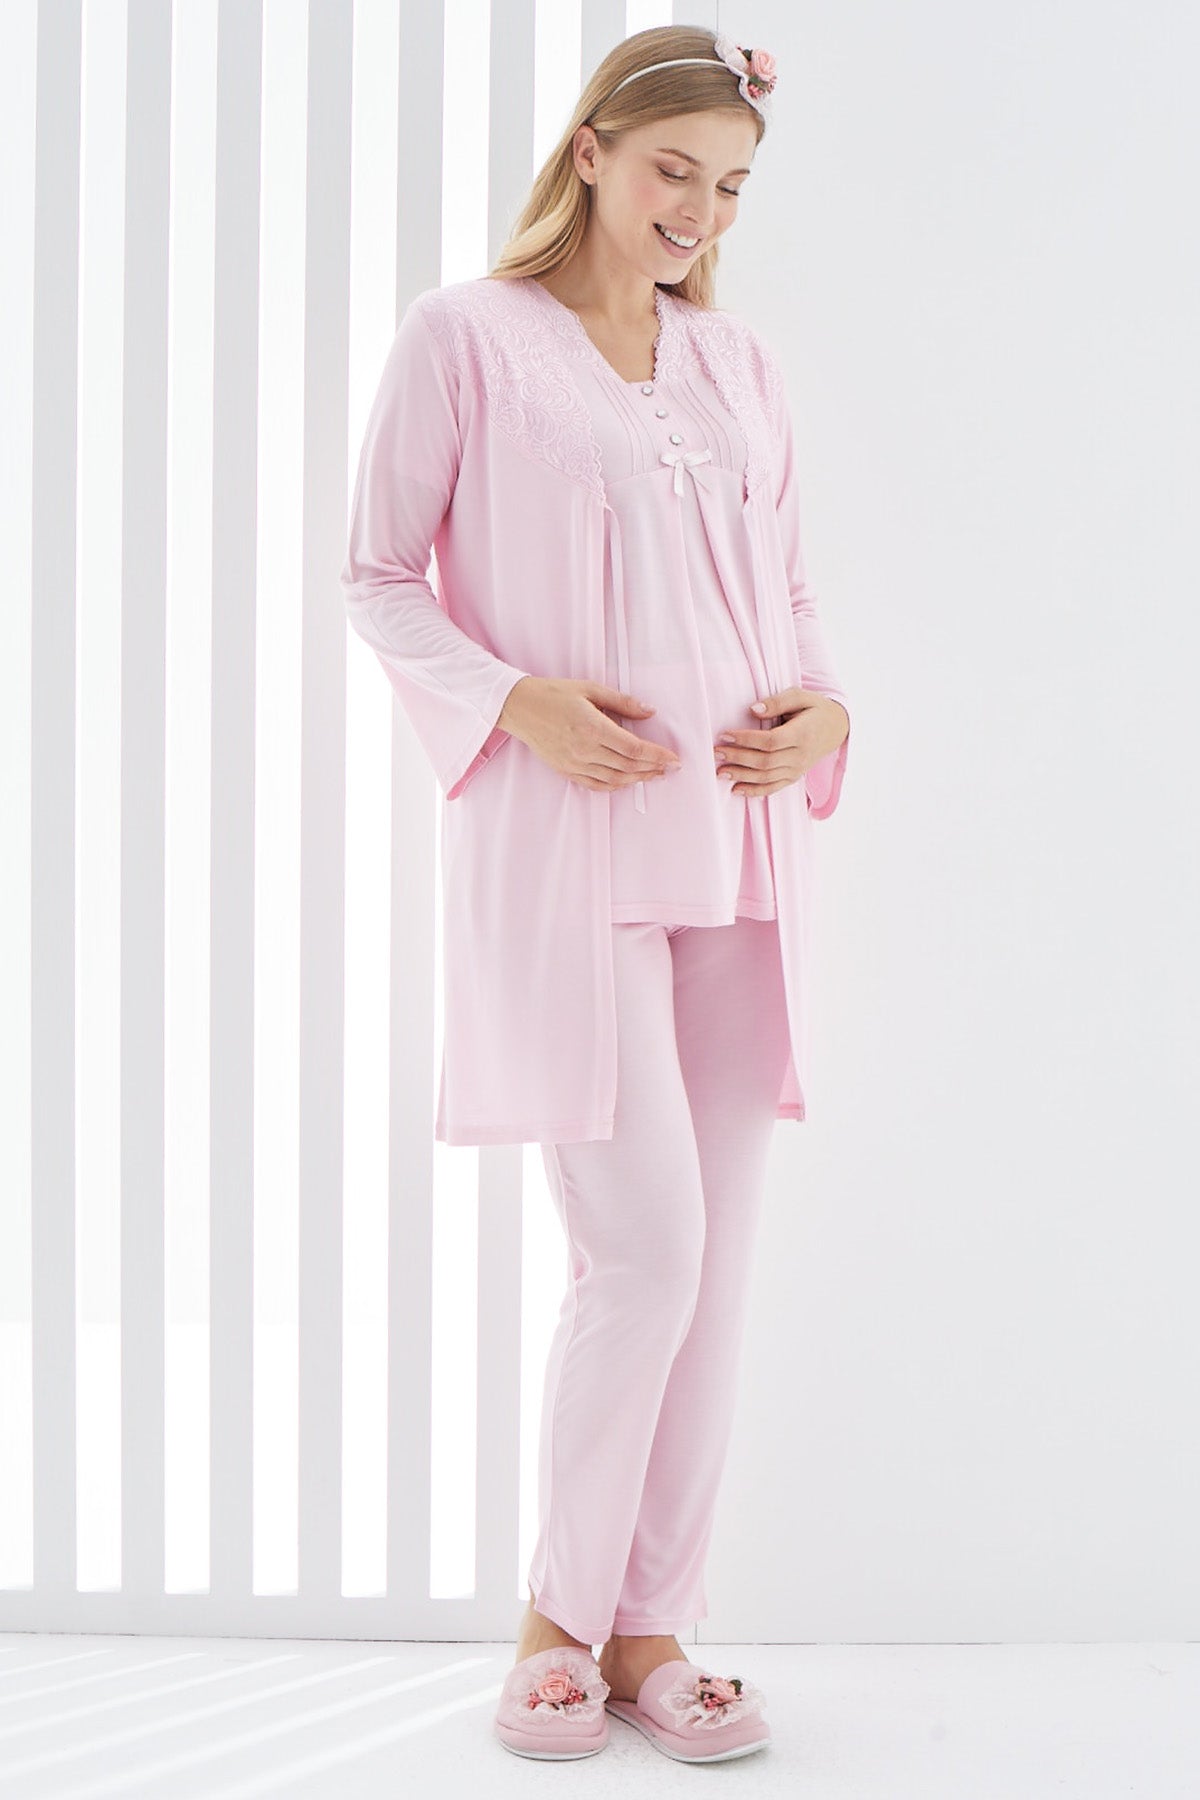 Shopymommy 3402 Lace 3-Pieces Maternity & Nursing Pajamas With Guipure Robe Pink